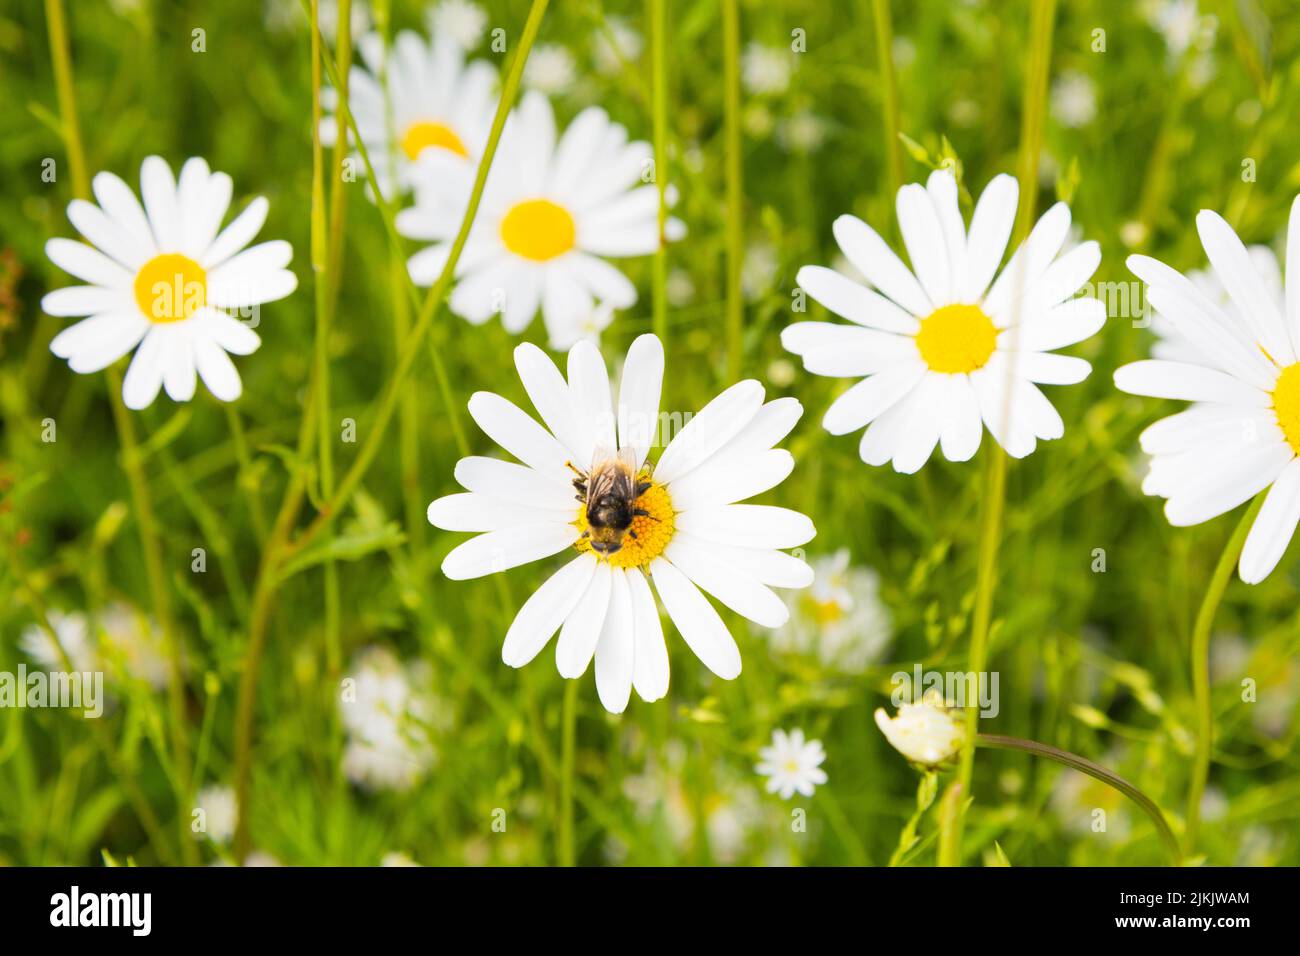 A honey bee pollinating a blooming daisy in summer. Stock Photo